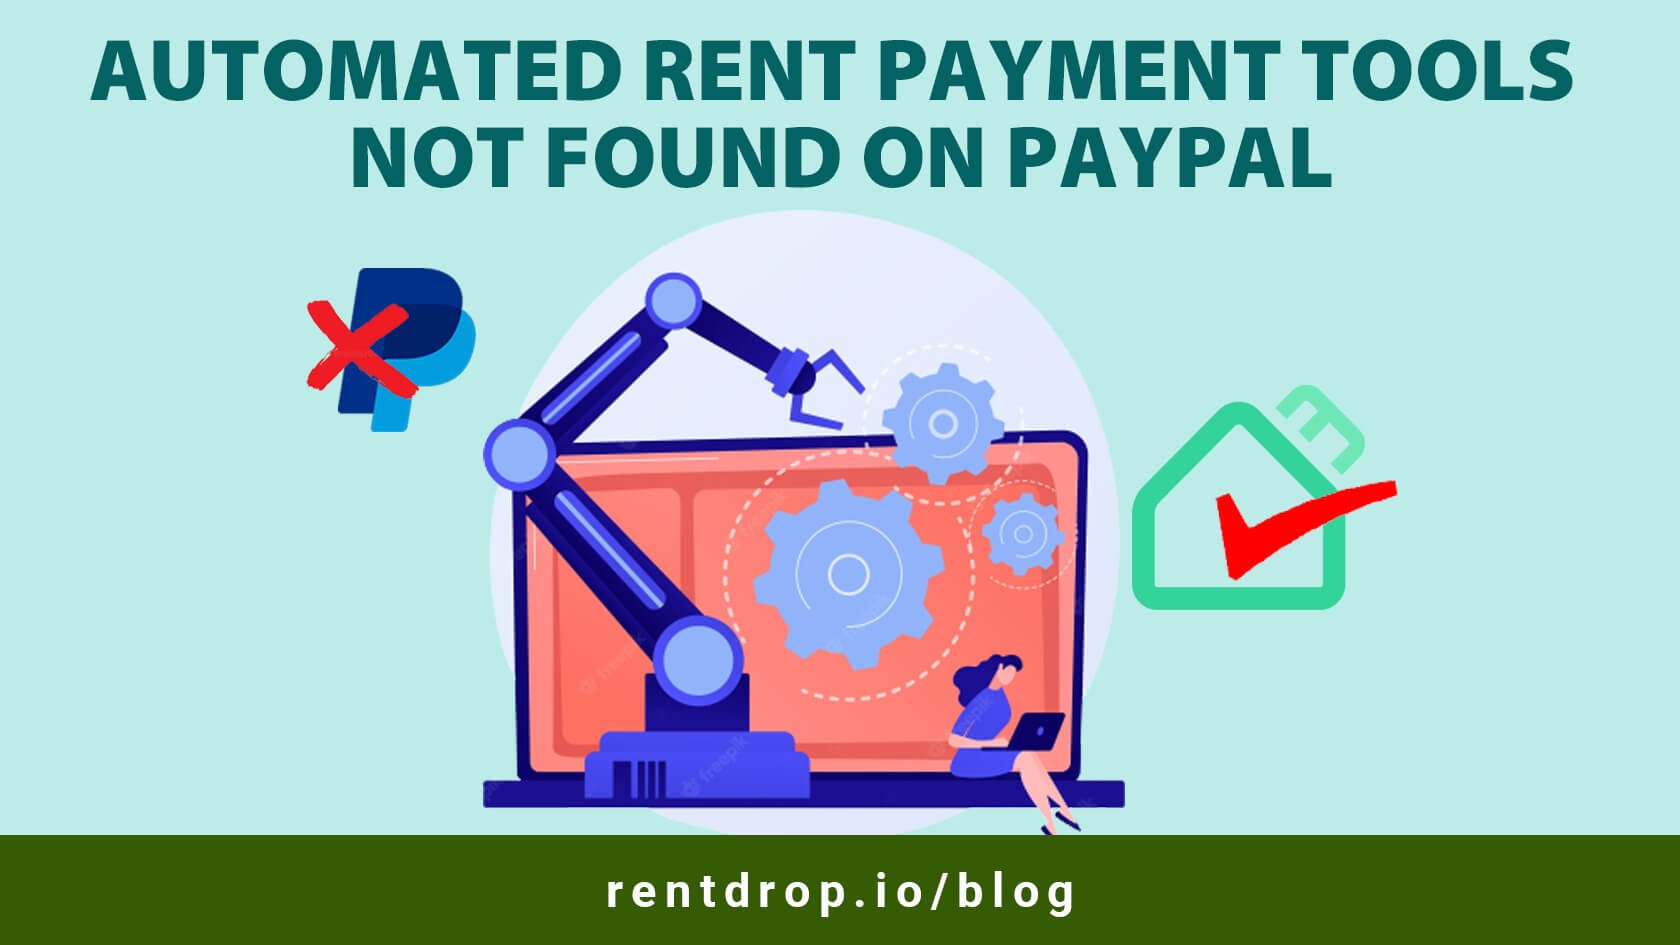 image of Valuable Automated Rent Payment Tools Not Found on PayPal